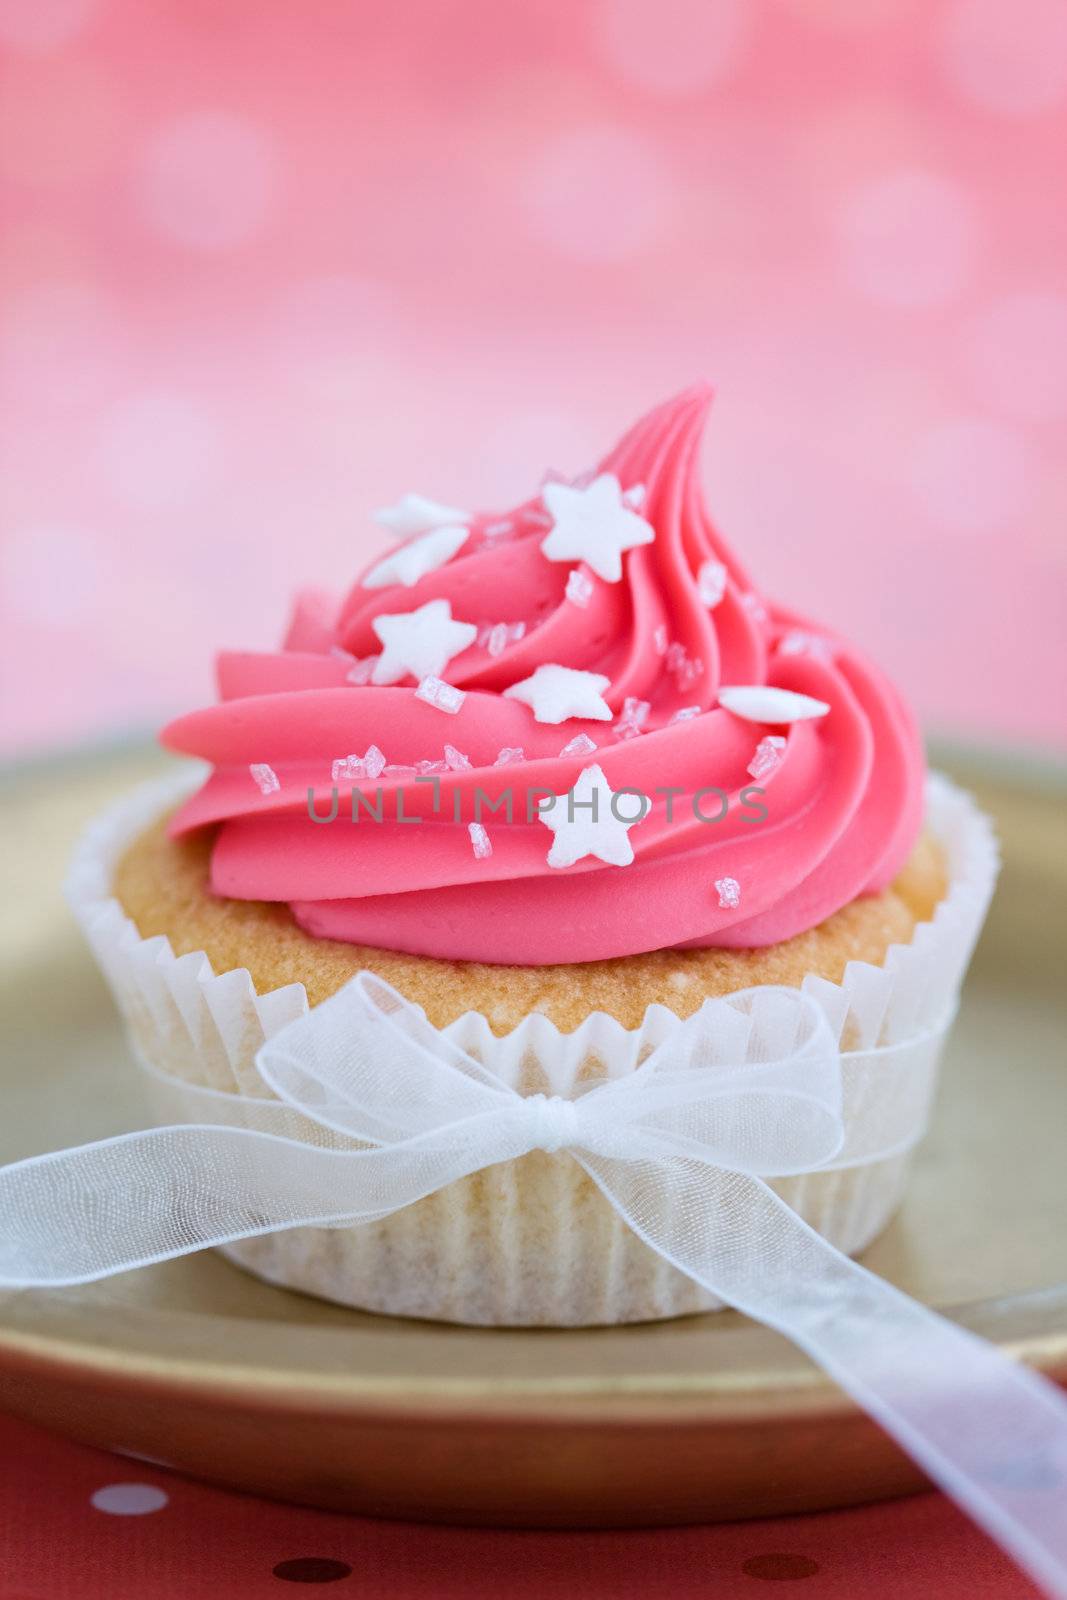 Cupcake decorated with pink frosting and an organza ribbon